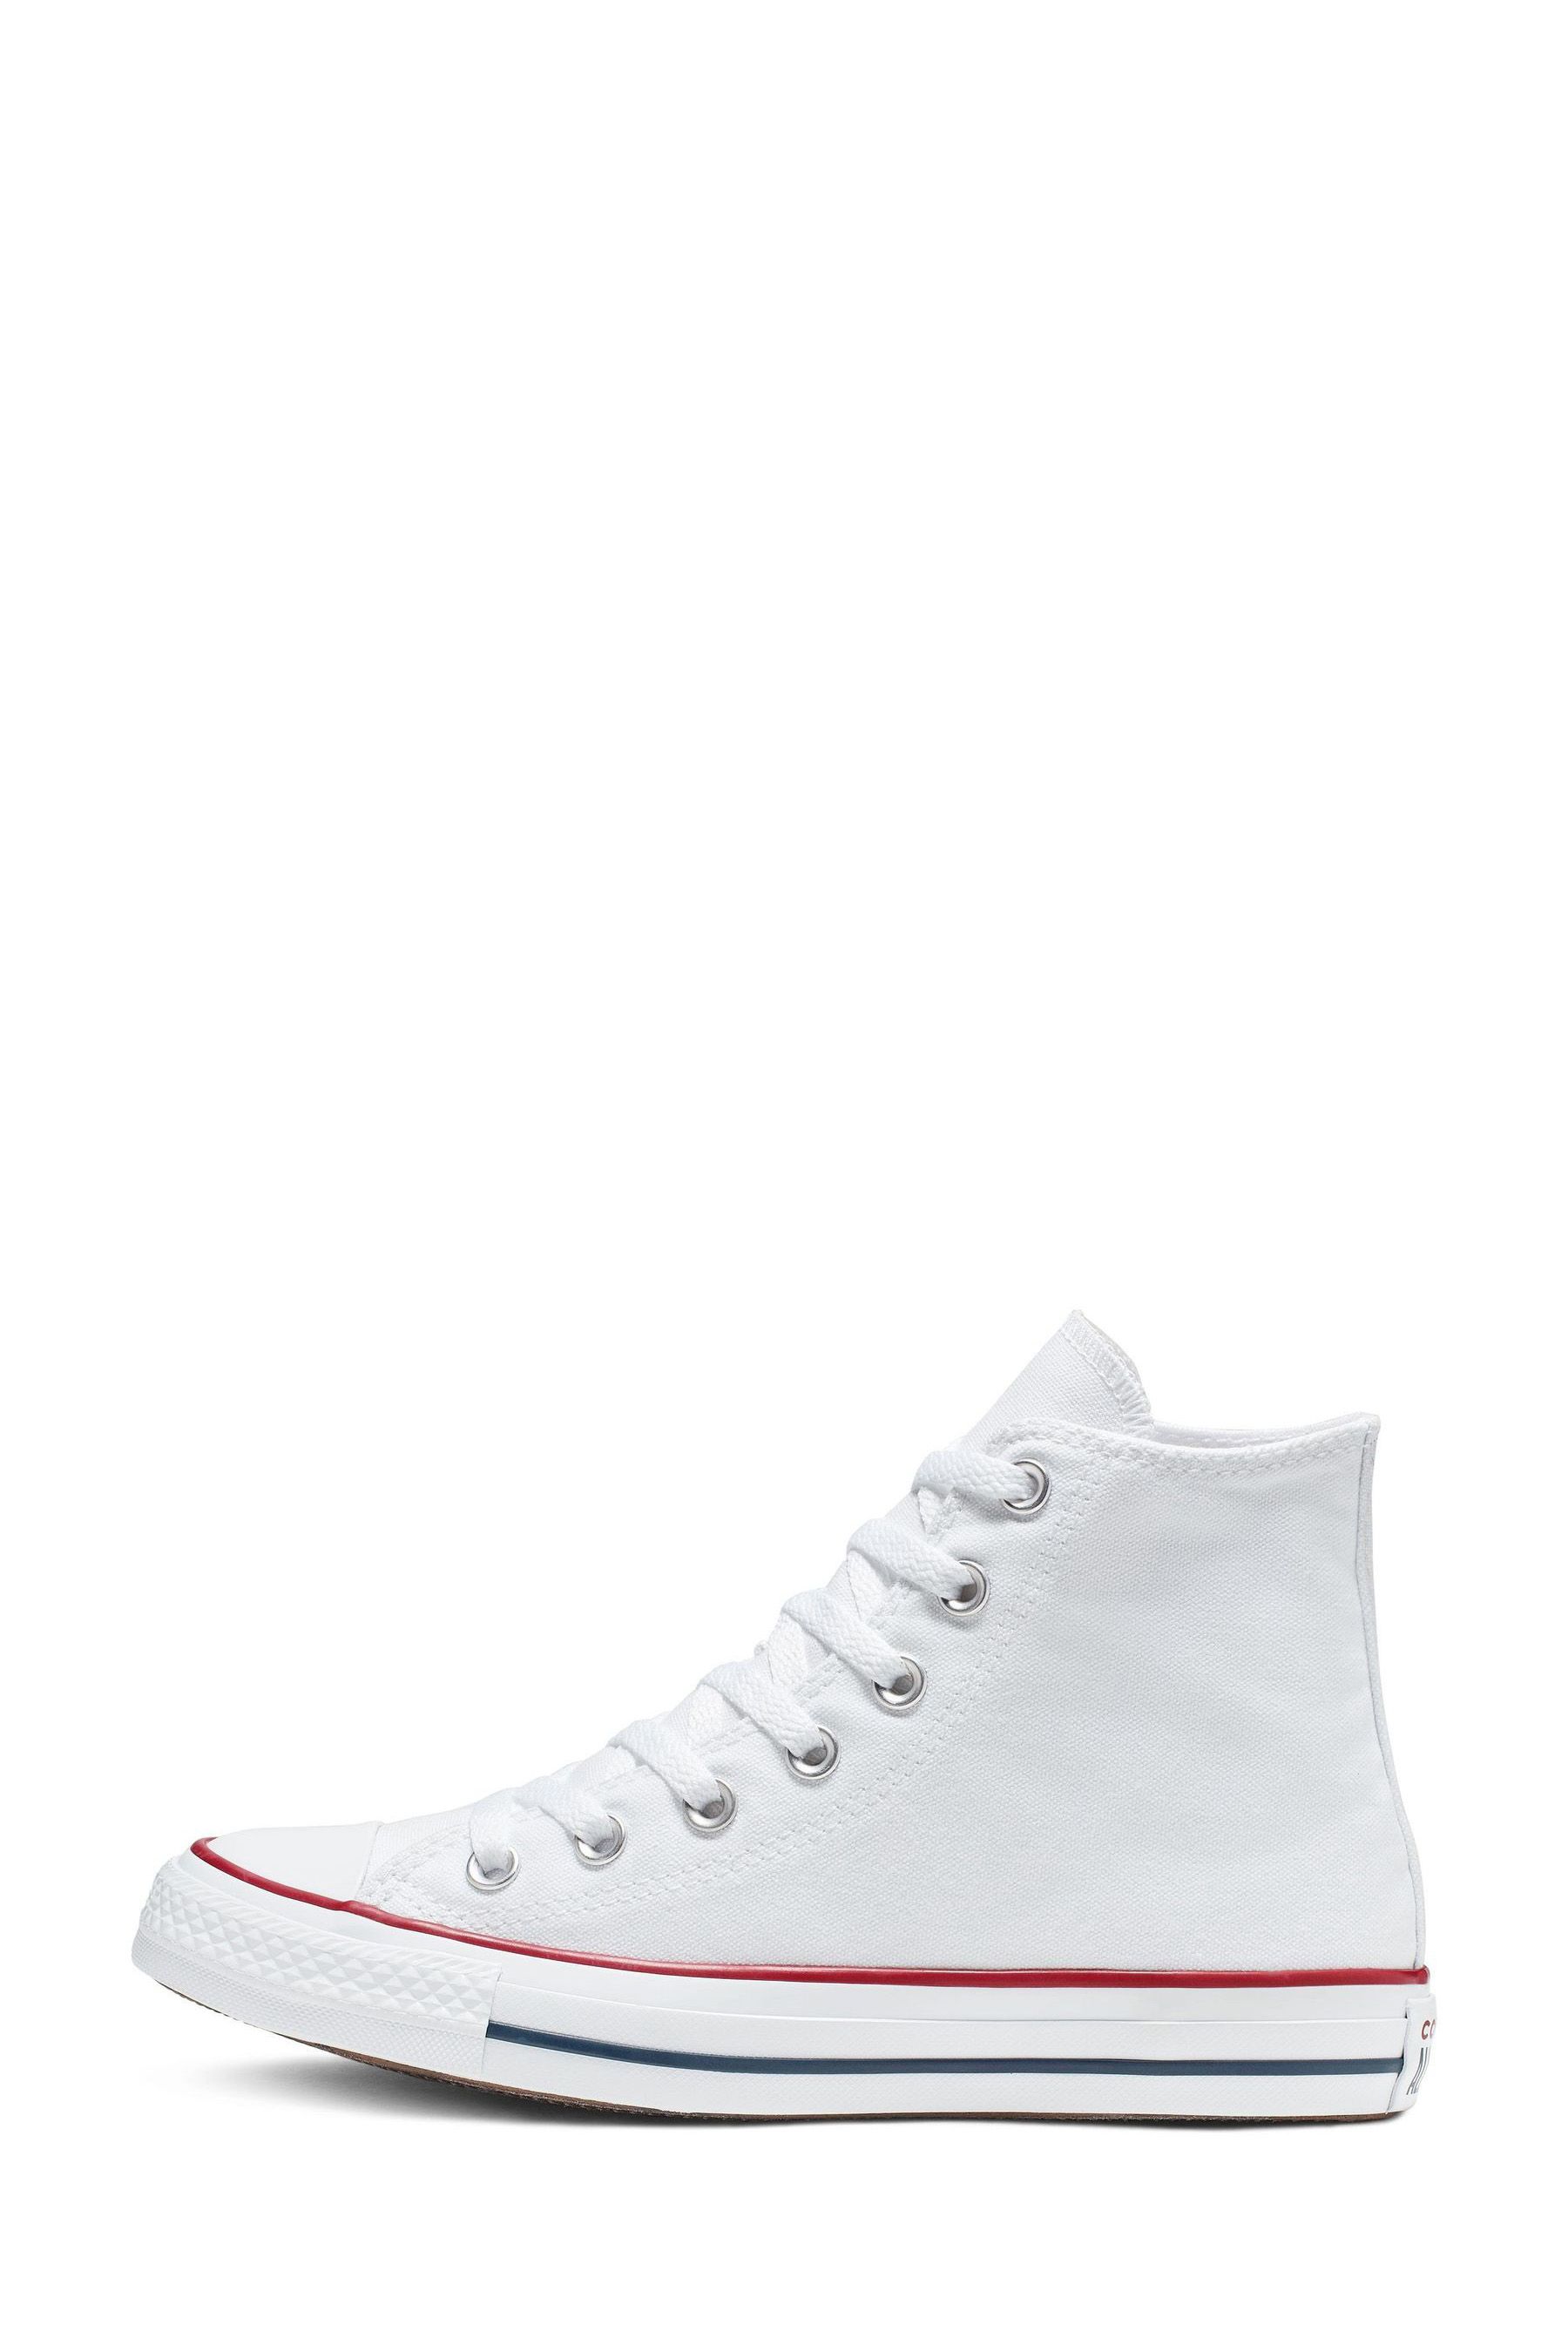 Buy Converse White Wide Fit Chuck Taylor All Star High Trainers from ...